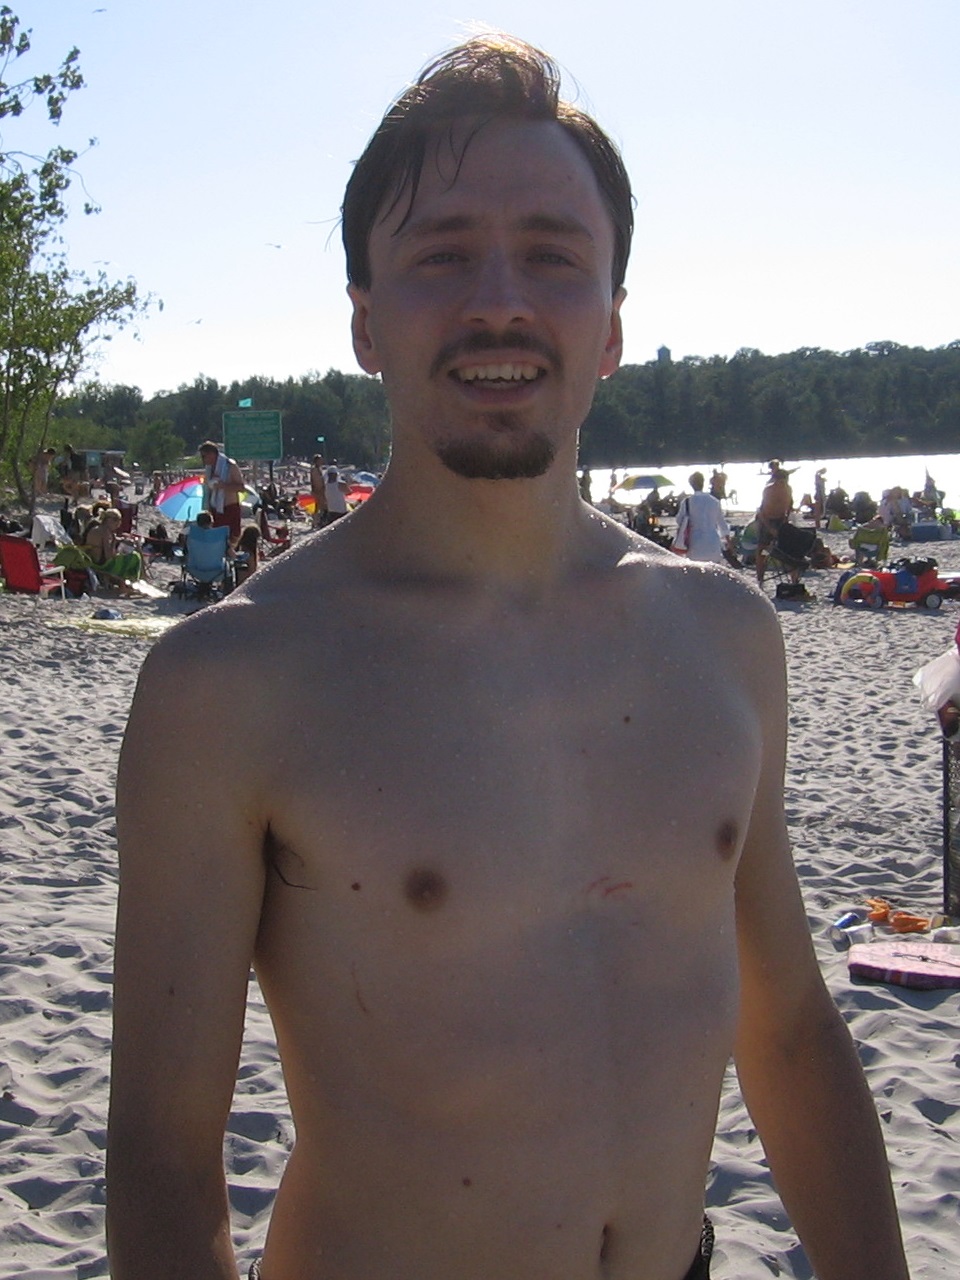 Kabutroid with a moustache and goatee, topless on the beach